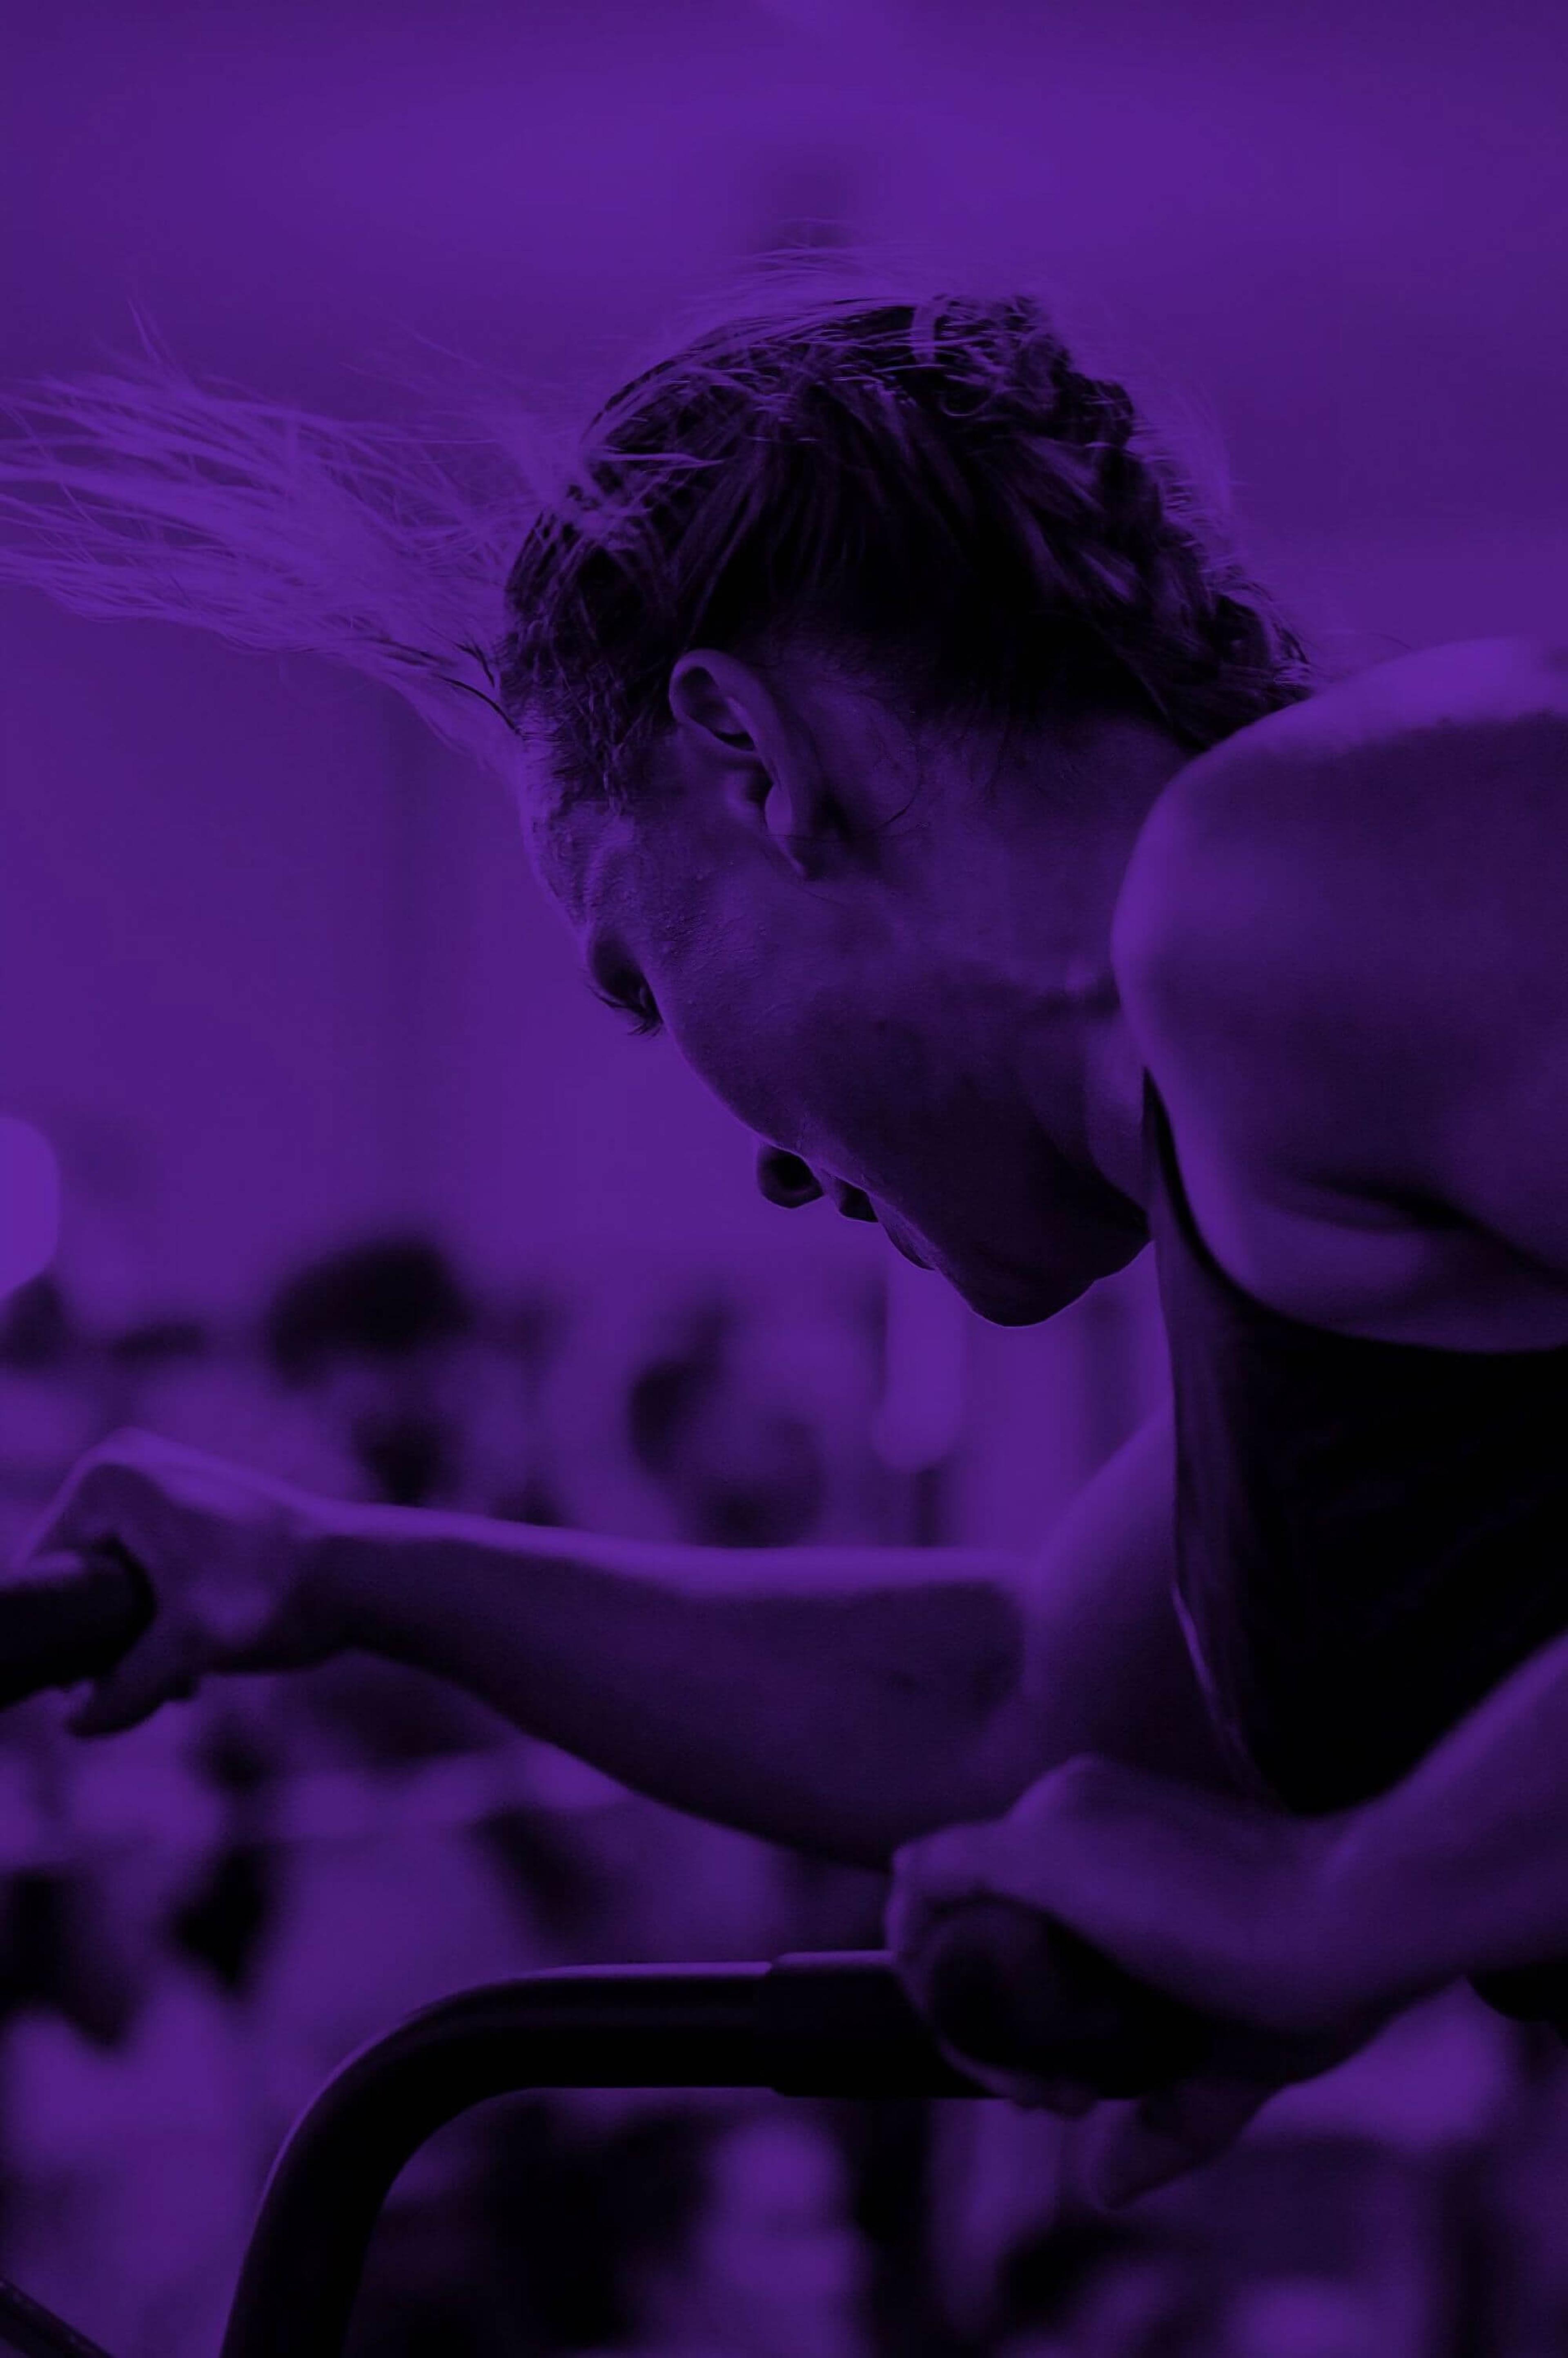 A woman doing a fitness routine, with a purple overlay